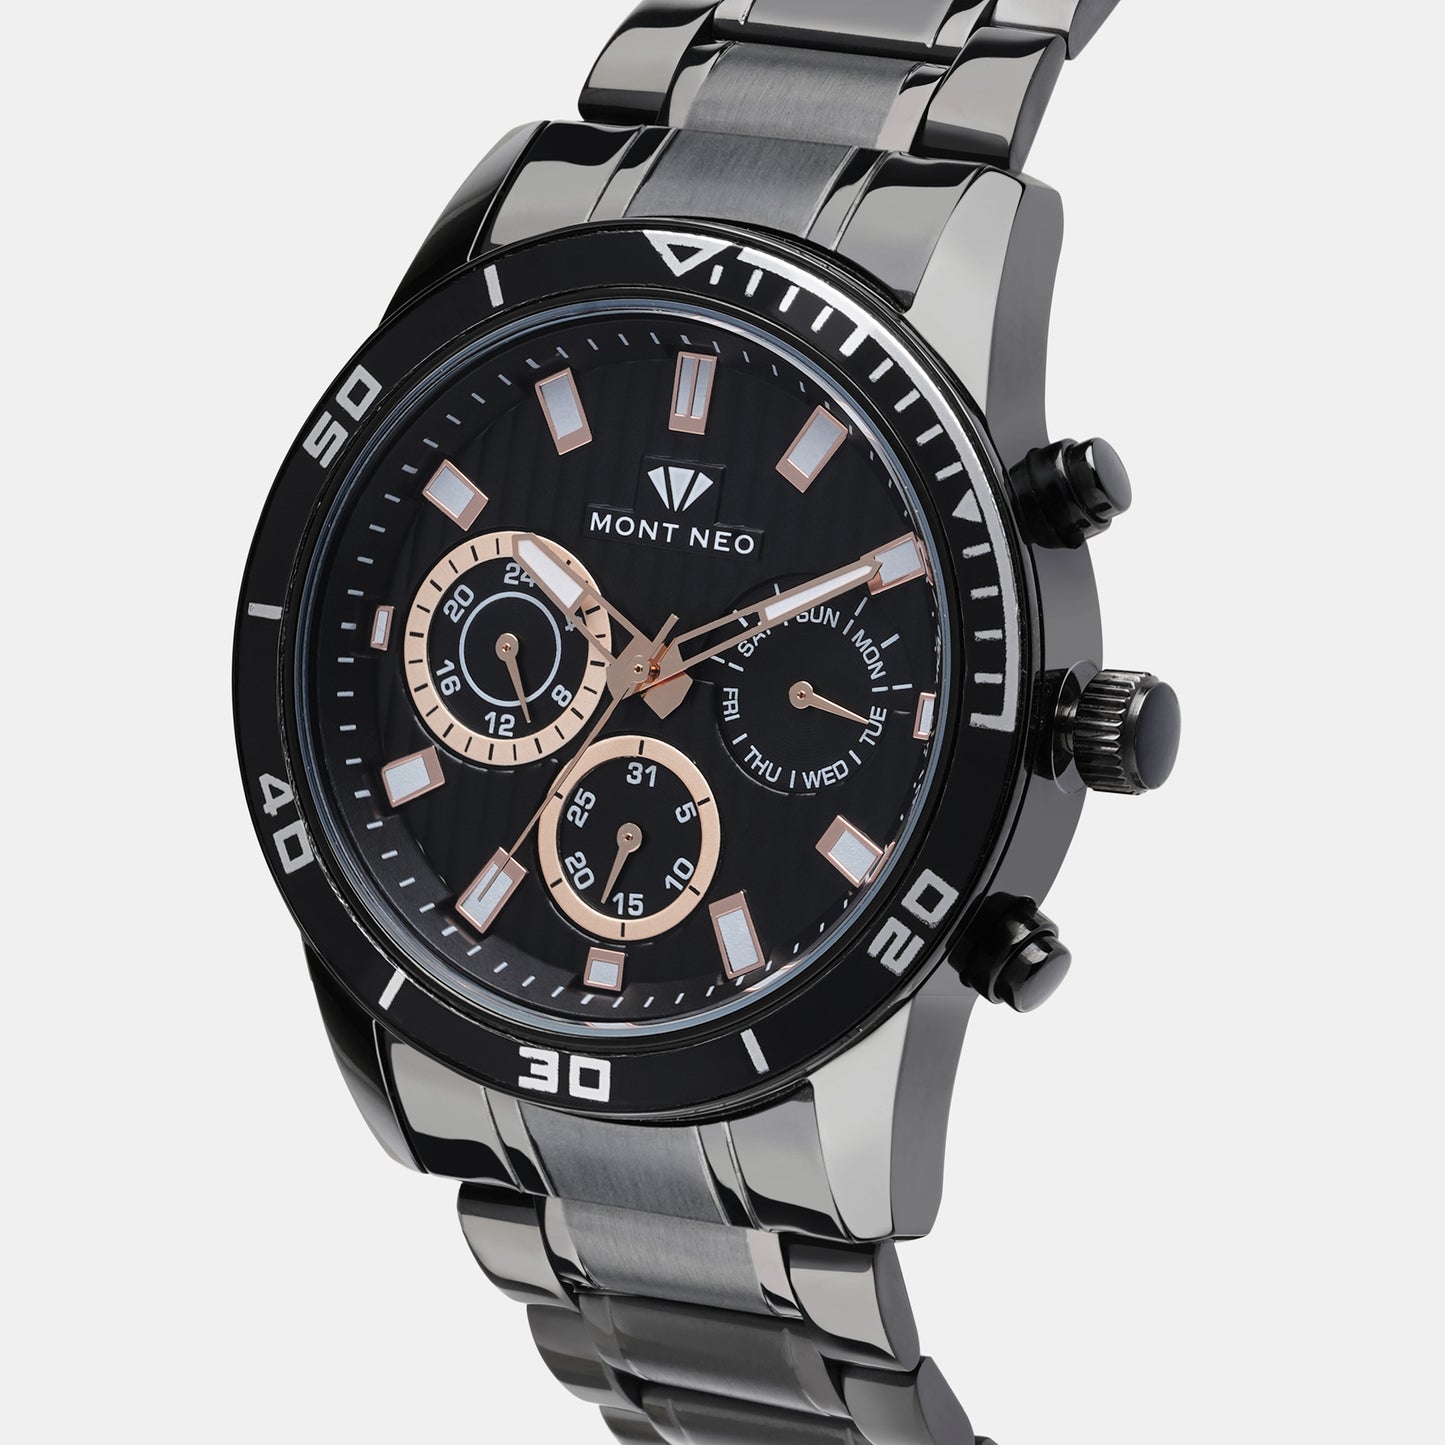 Refined Black Chronograph Male Stainless Steel Watch 1036C-M4404